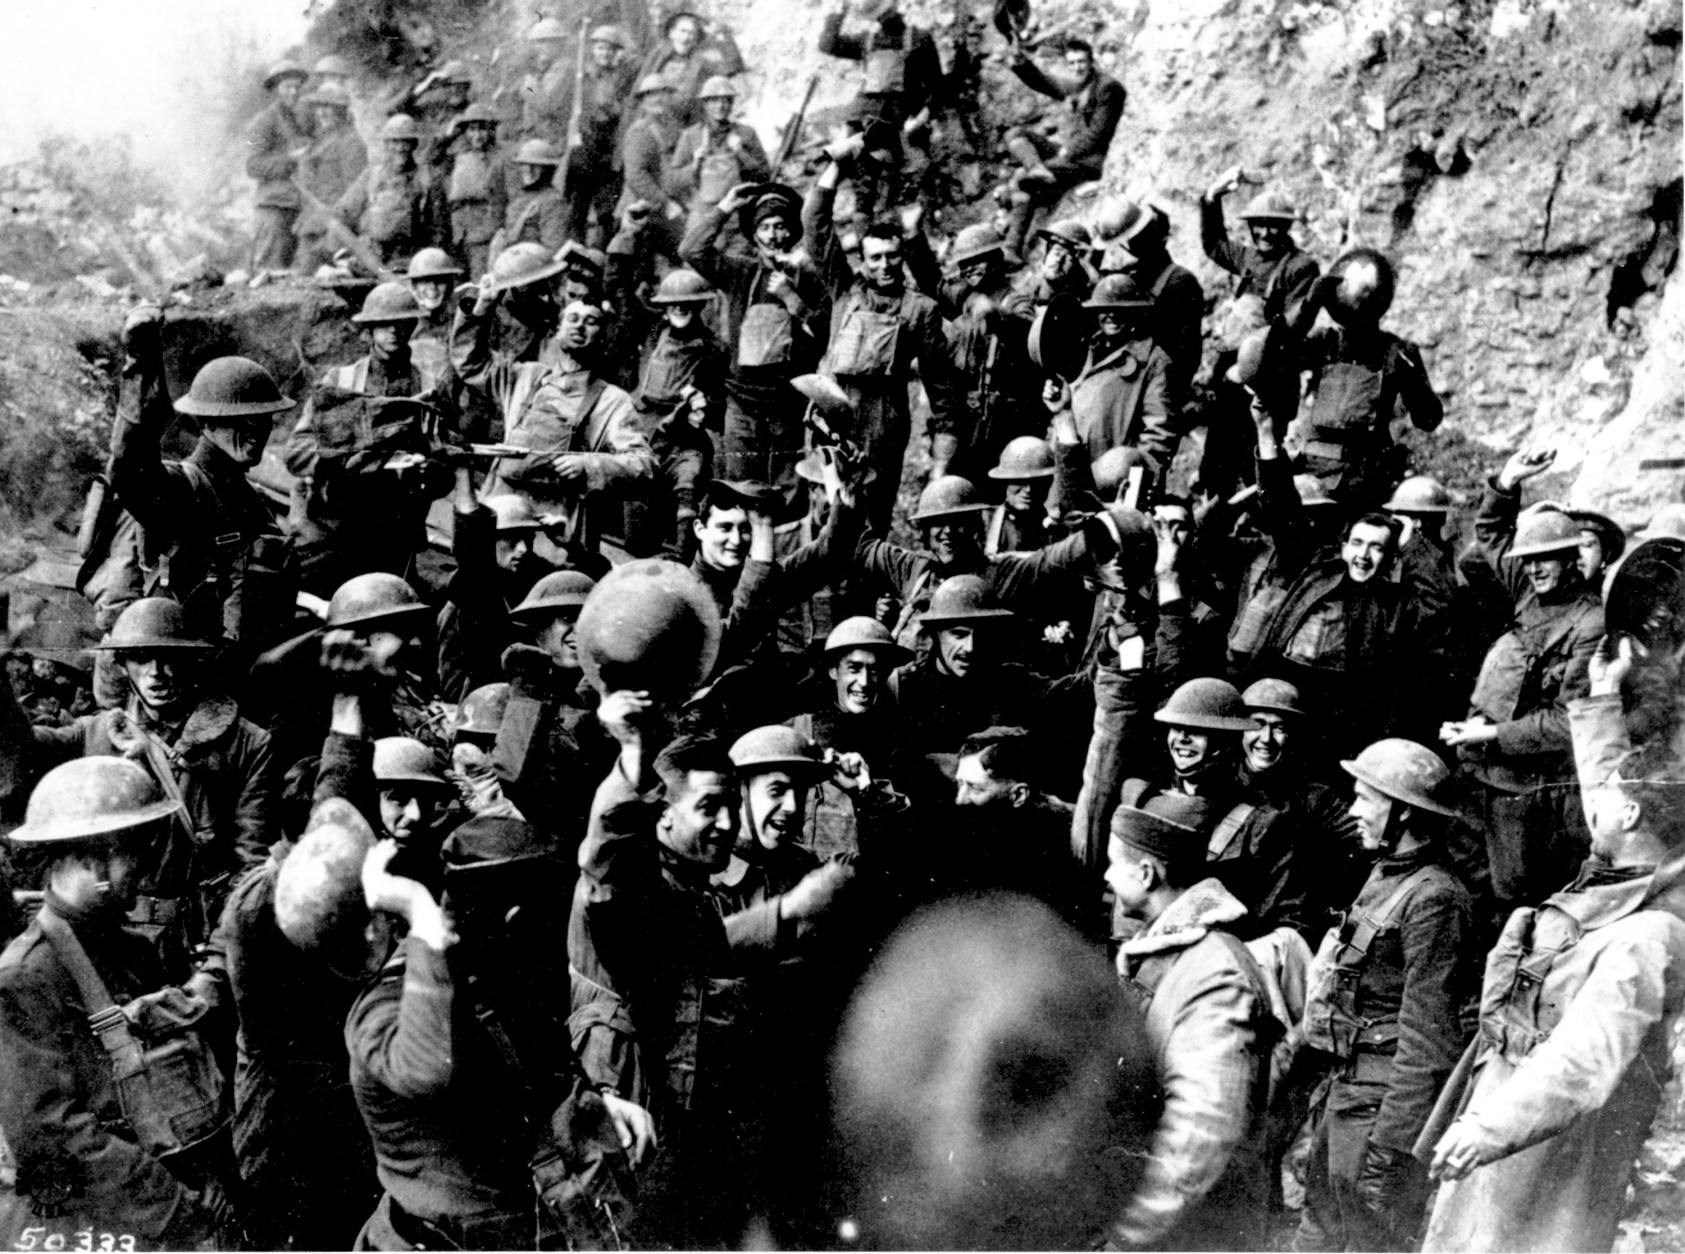 American troops cheer after hearing the news that the Armistice has been signed, ending World War I in Nov. 1918.  They are located on the front northeast of St. Mihiel, France.  Similar celebrations took place all along the line where the Americans were engaged in an offensive. (AP photo)